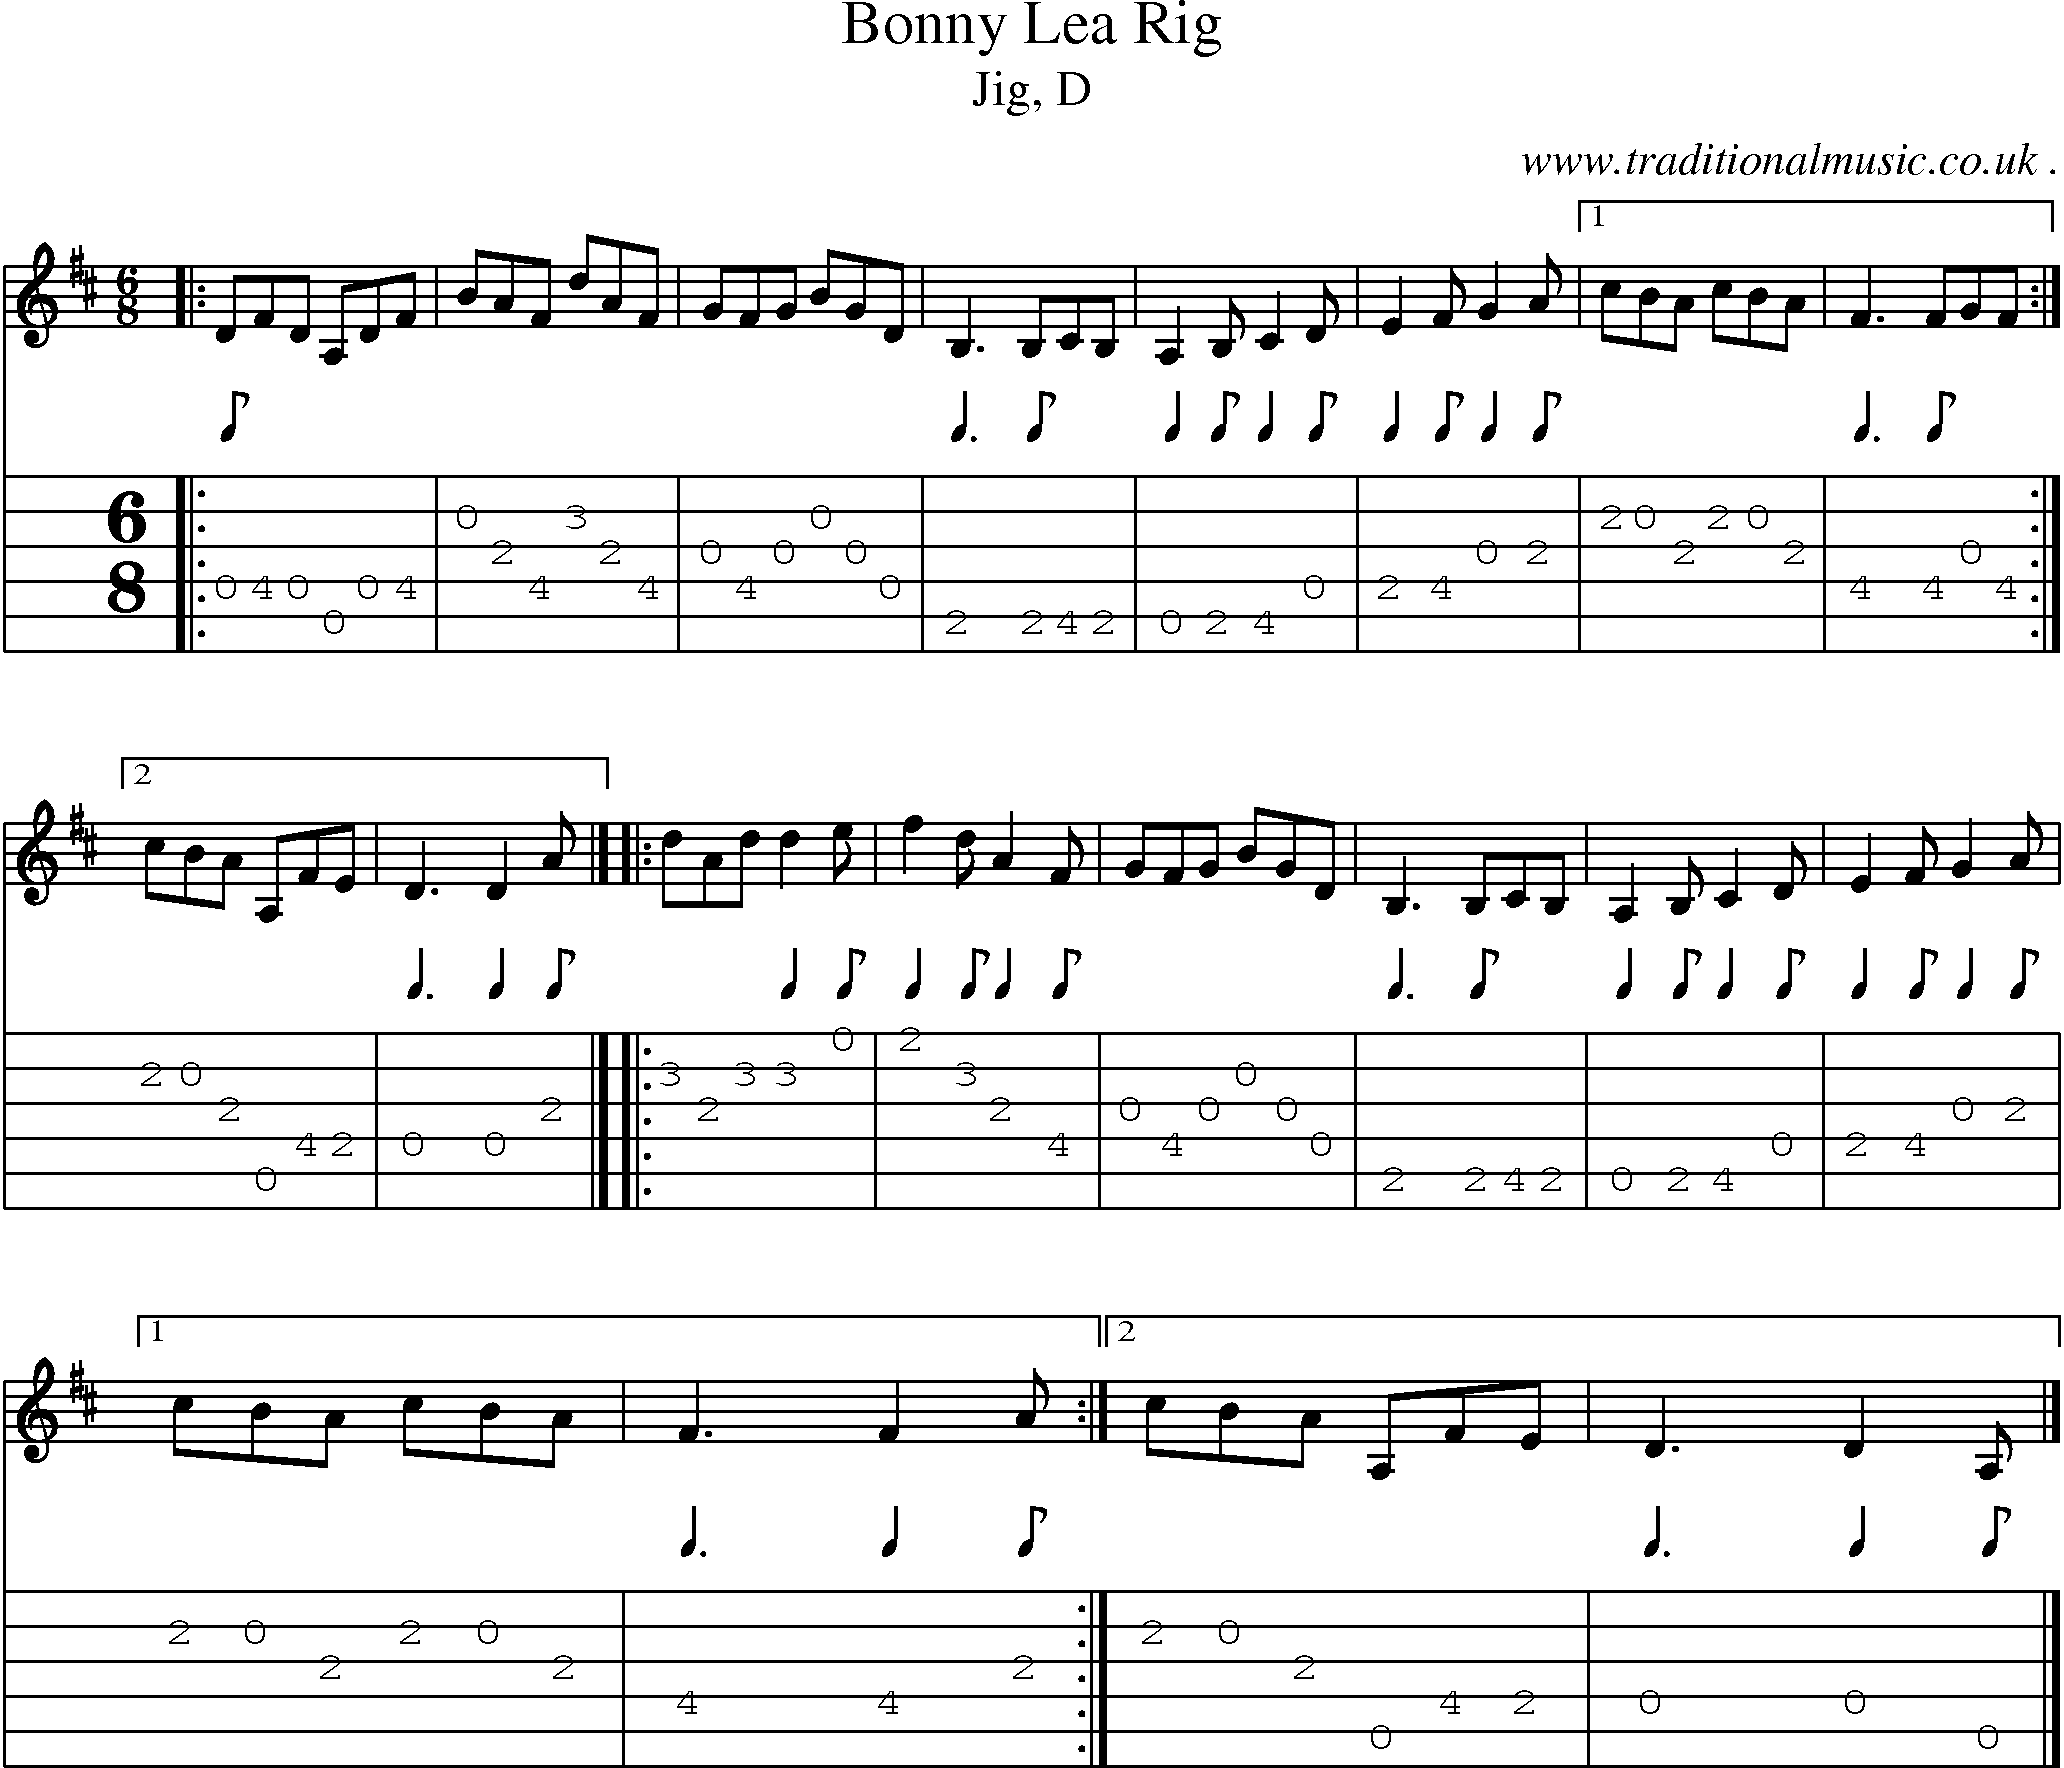 Sheet-music  score, Chords and Guitar Tabs for Bonny Lea Rig